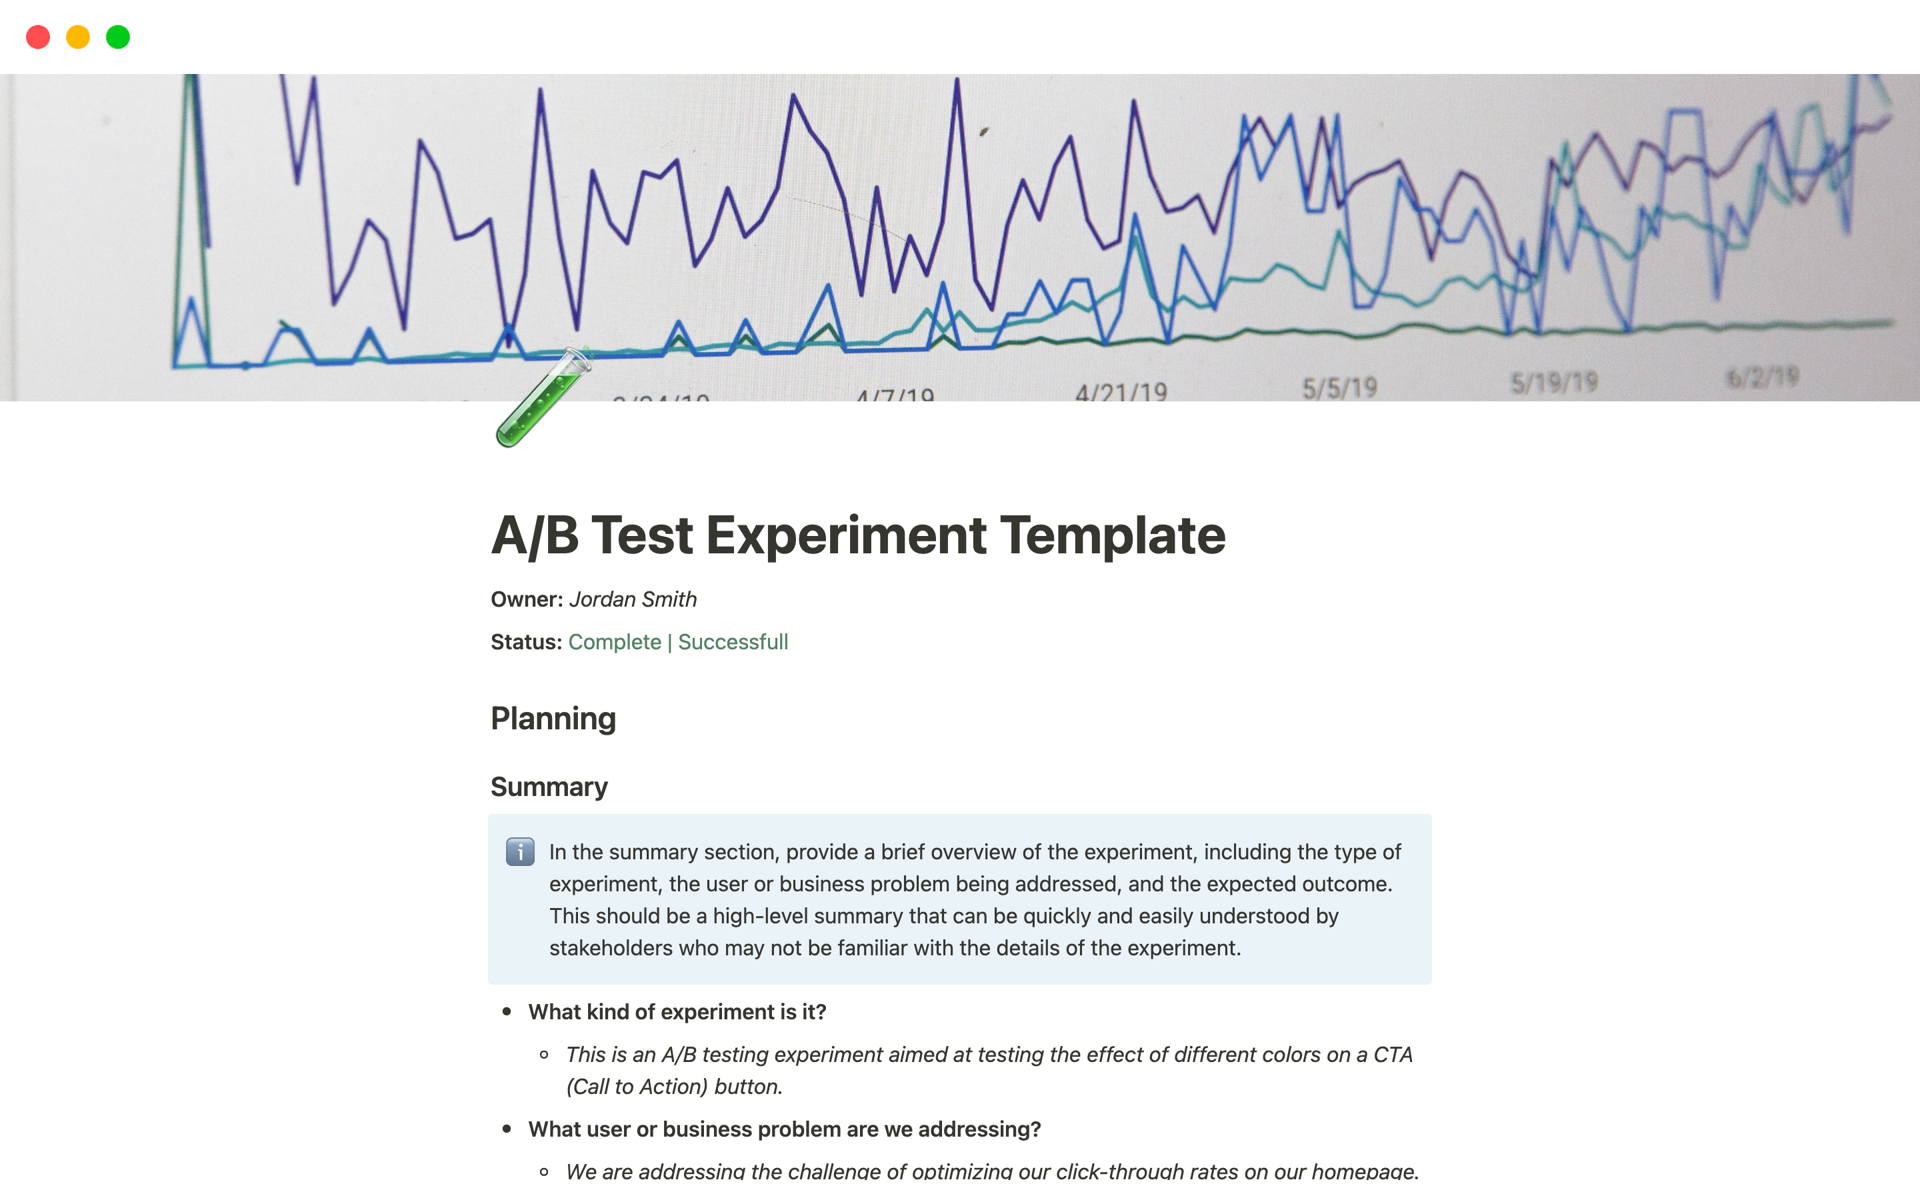 A comprehensive A/B Test Experiment Template for Notion. Designed for clear experiment planning, meticulous result tracking, and insightful conclusions. Ideal for product managers, digital marketers, and UX researchers seeking to optimize effectively.